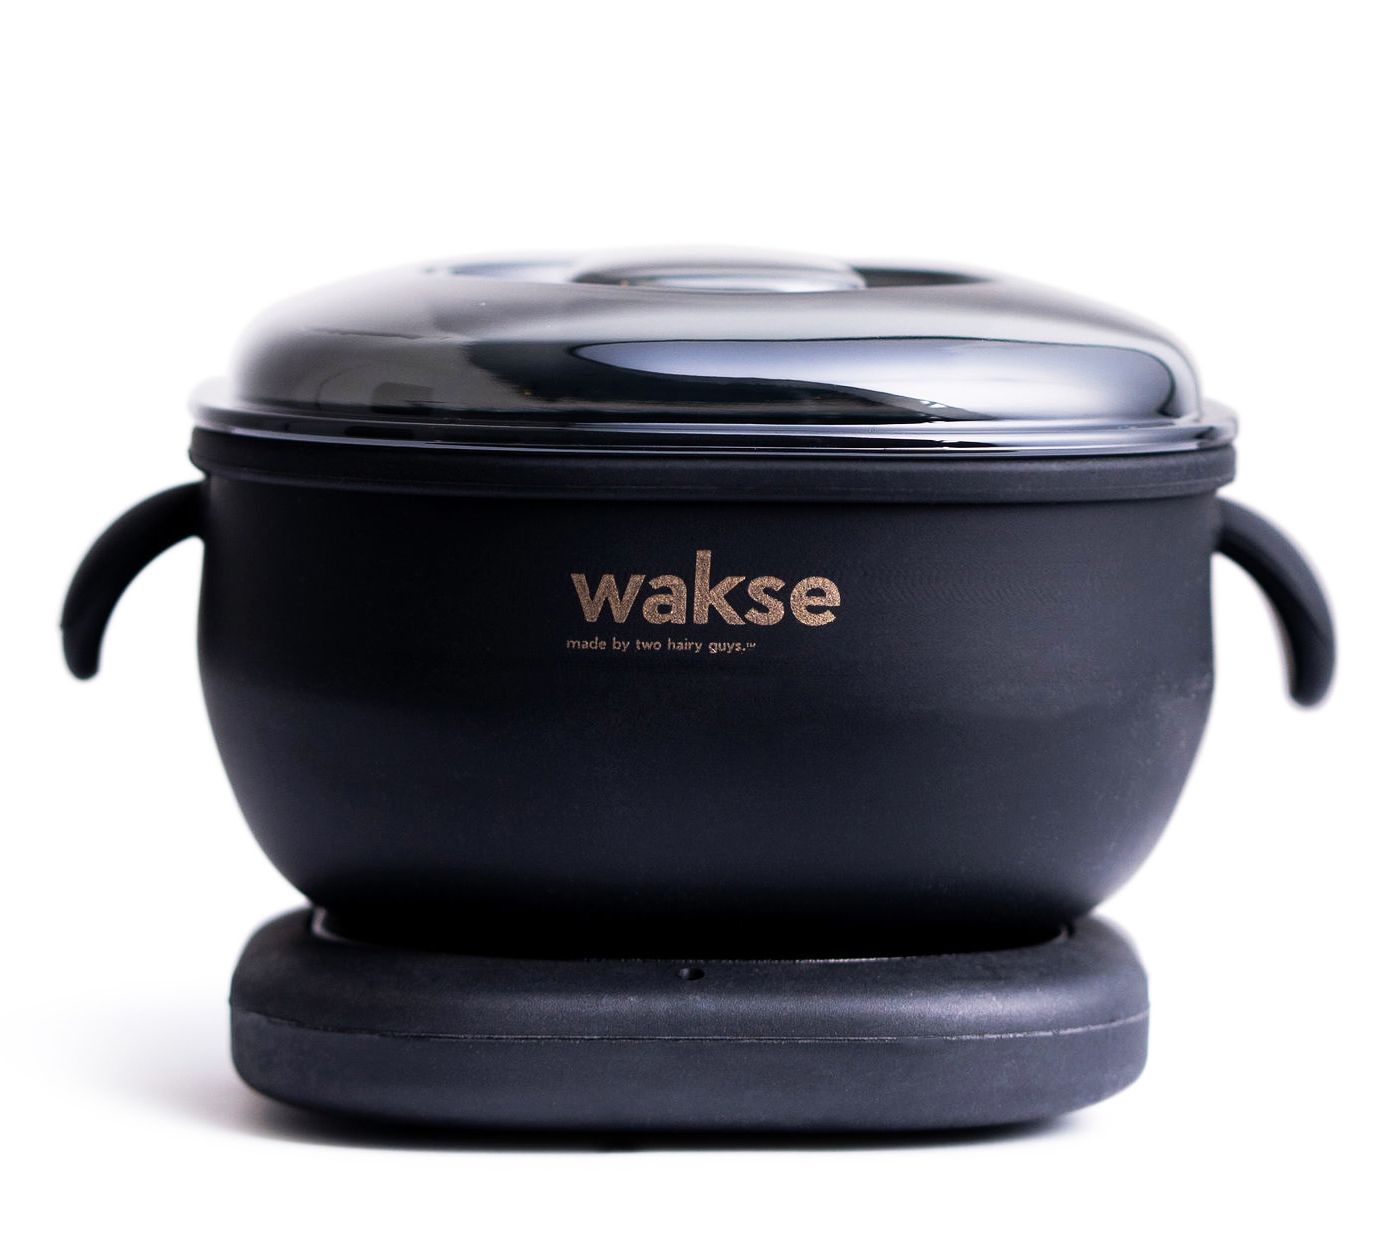 Wakse Melting Pot Electric Silicone Wax Warmer 